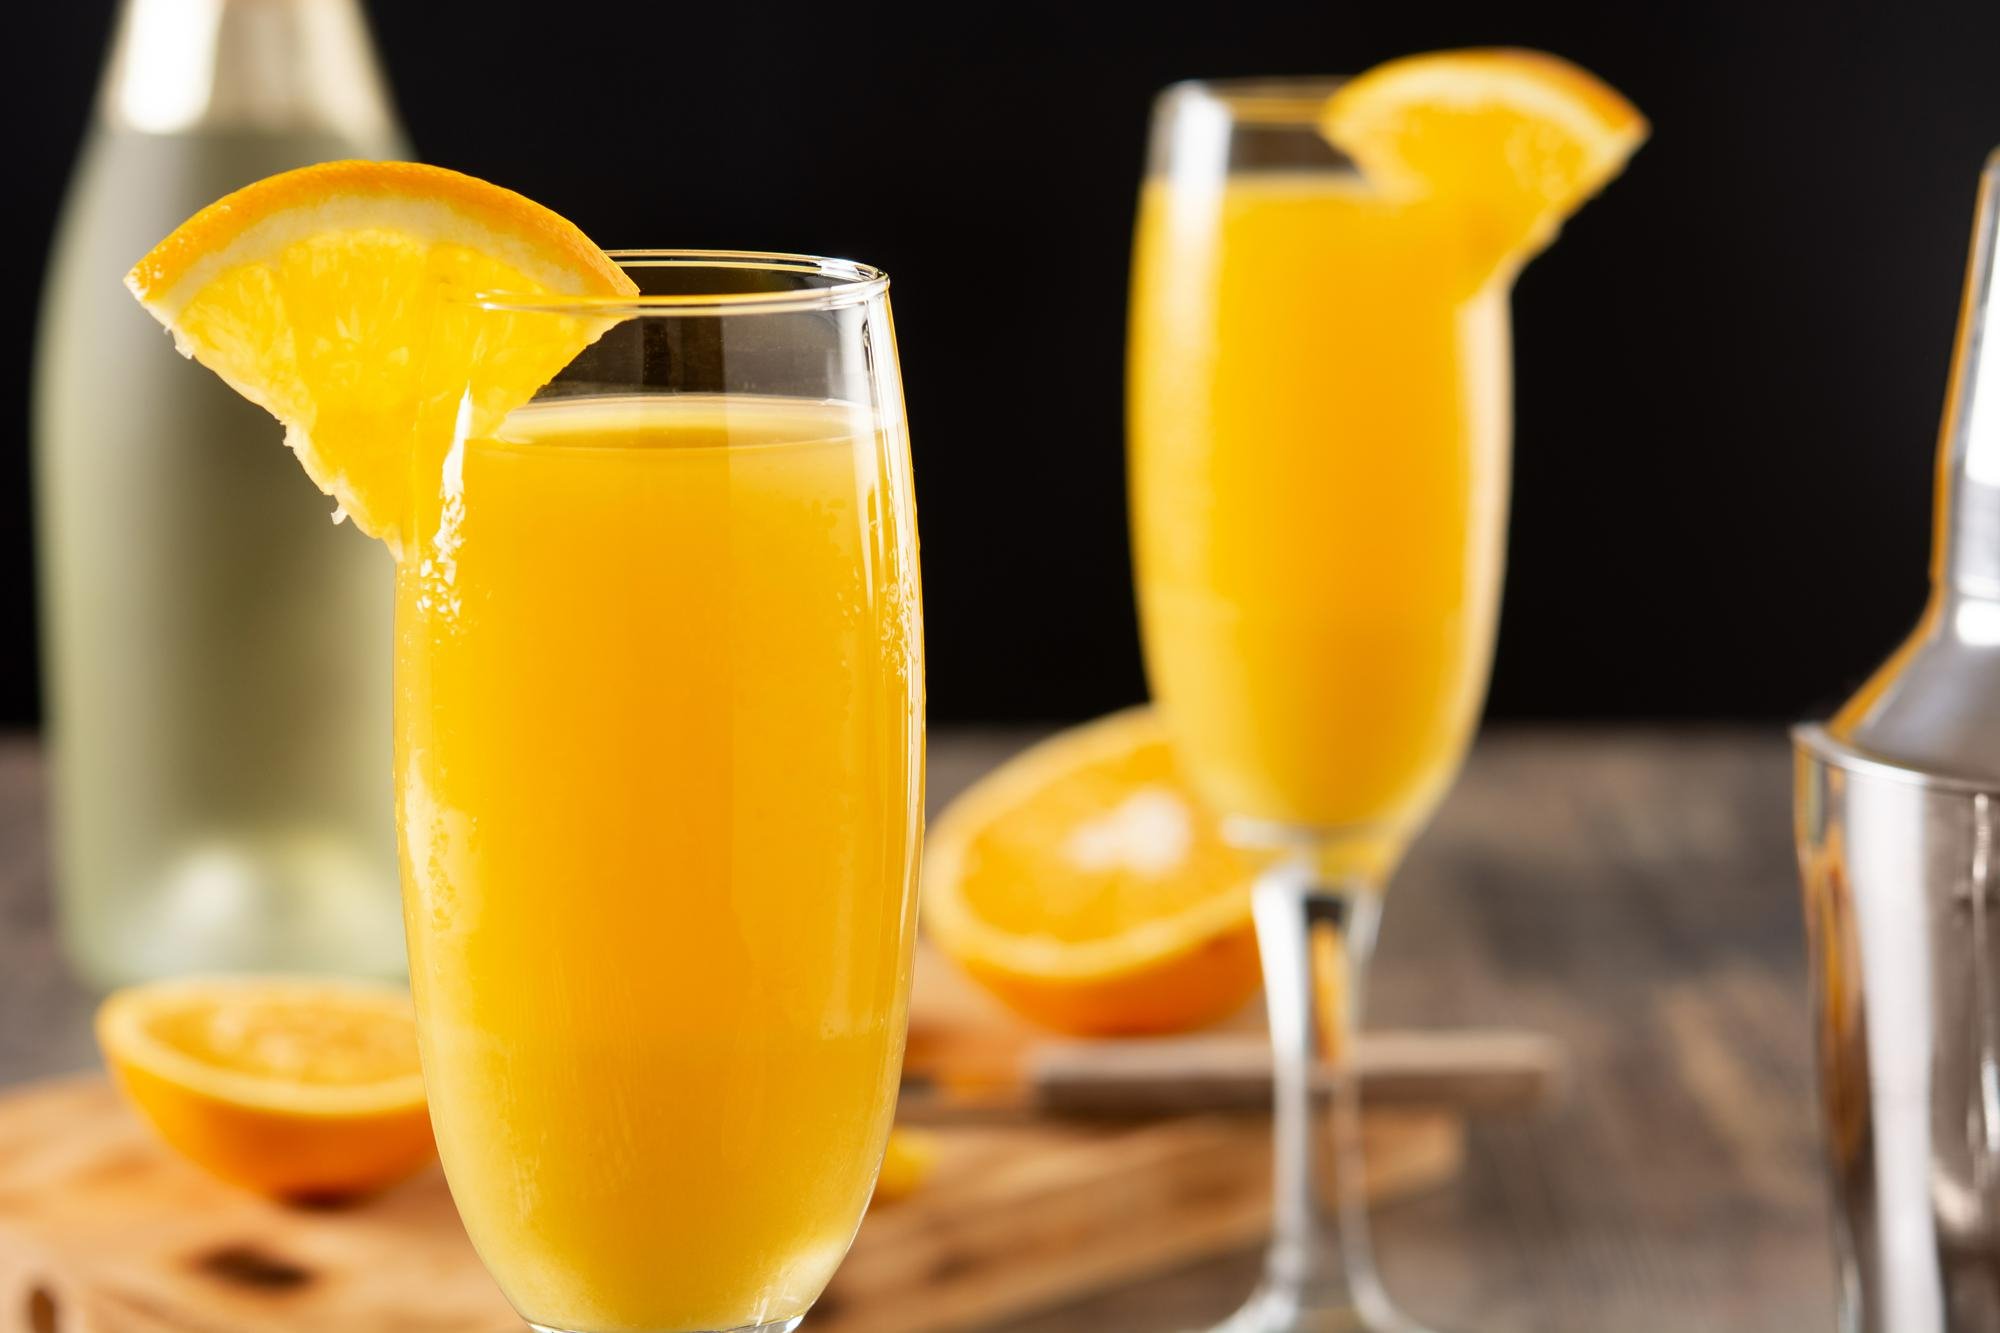 bottomless mimosas for Easter Sunday Specials at Innovo Kitchen